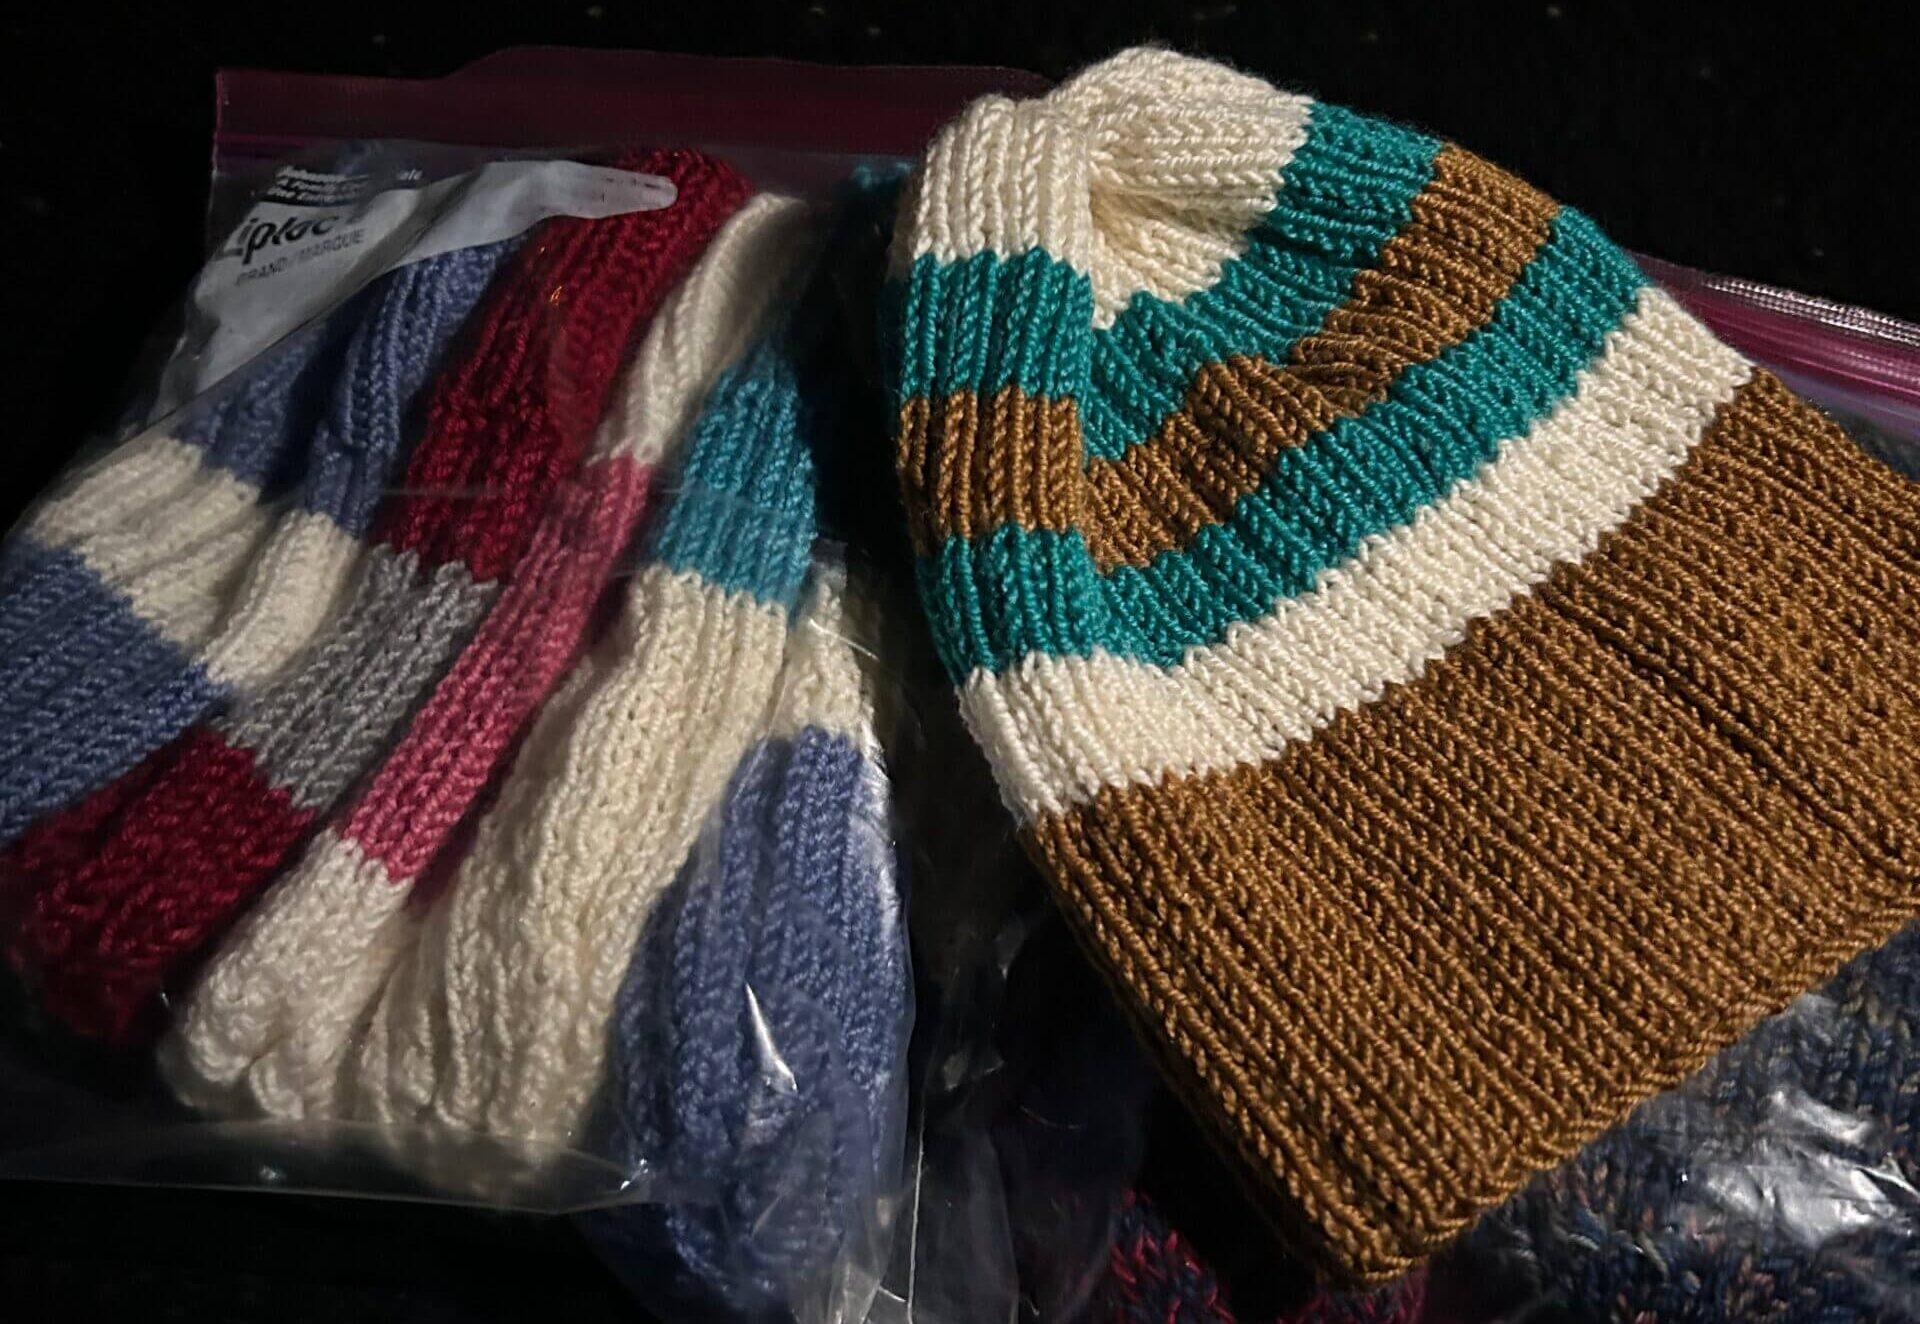 Streets of Hope Volunteer Donates Hand Knitted Hats